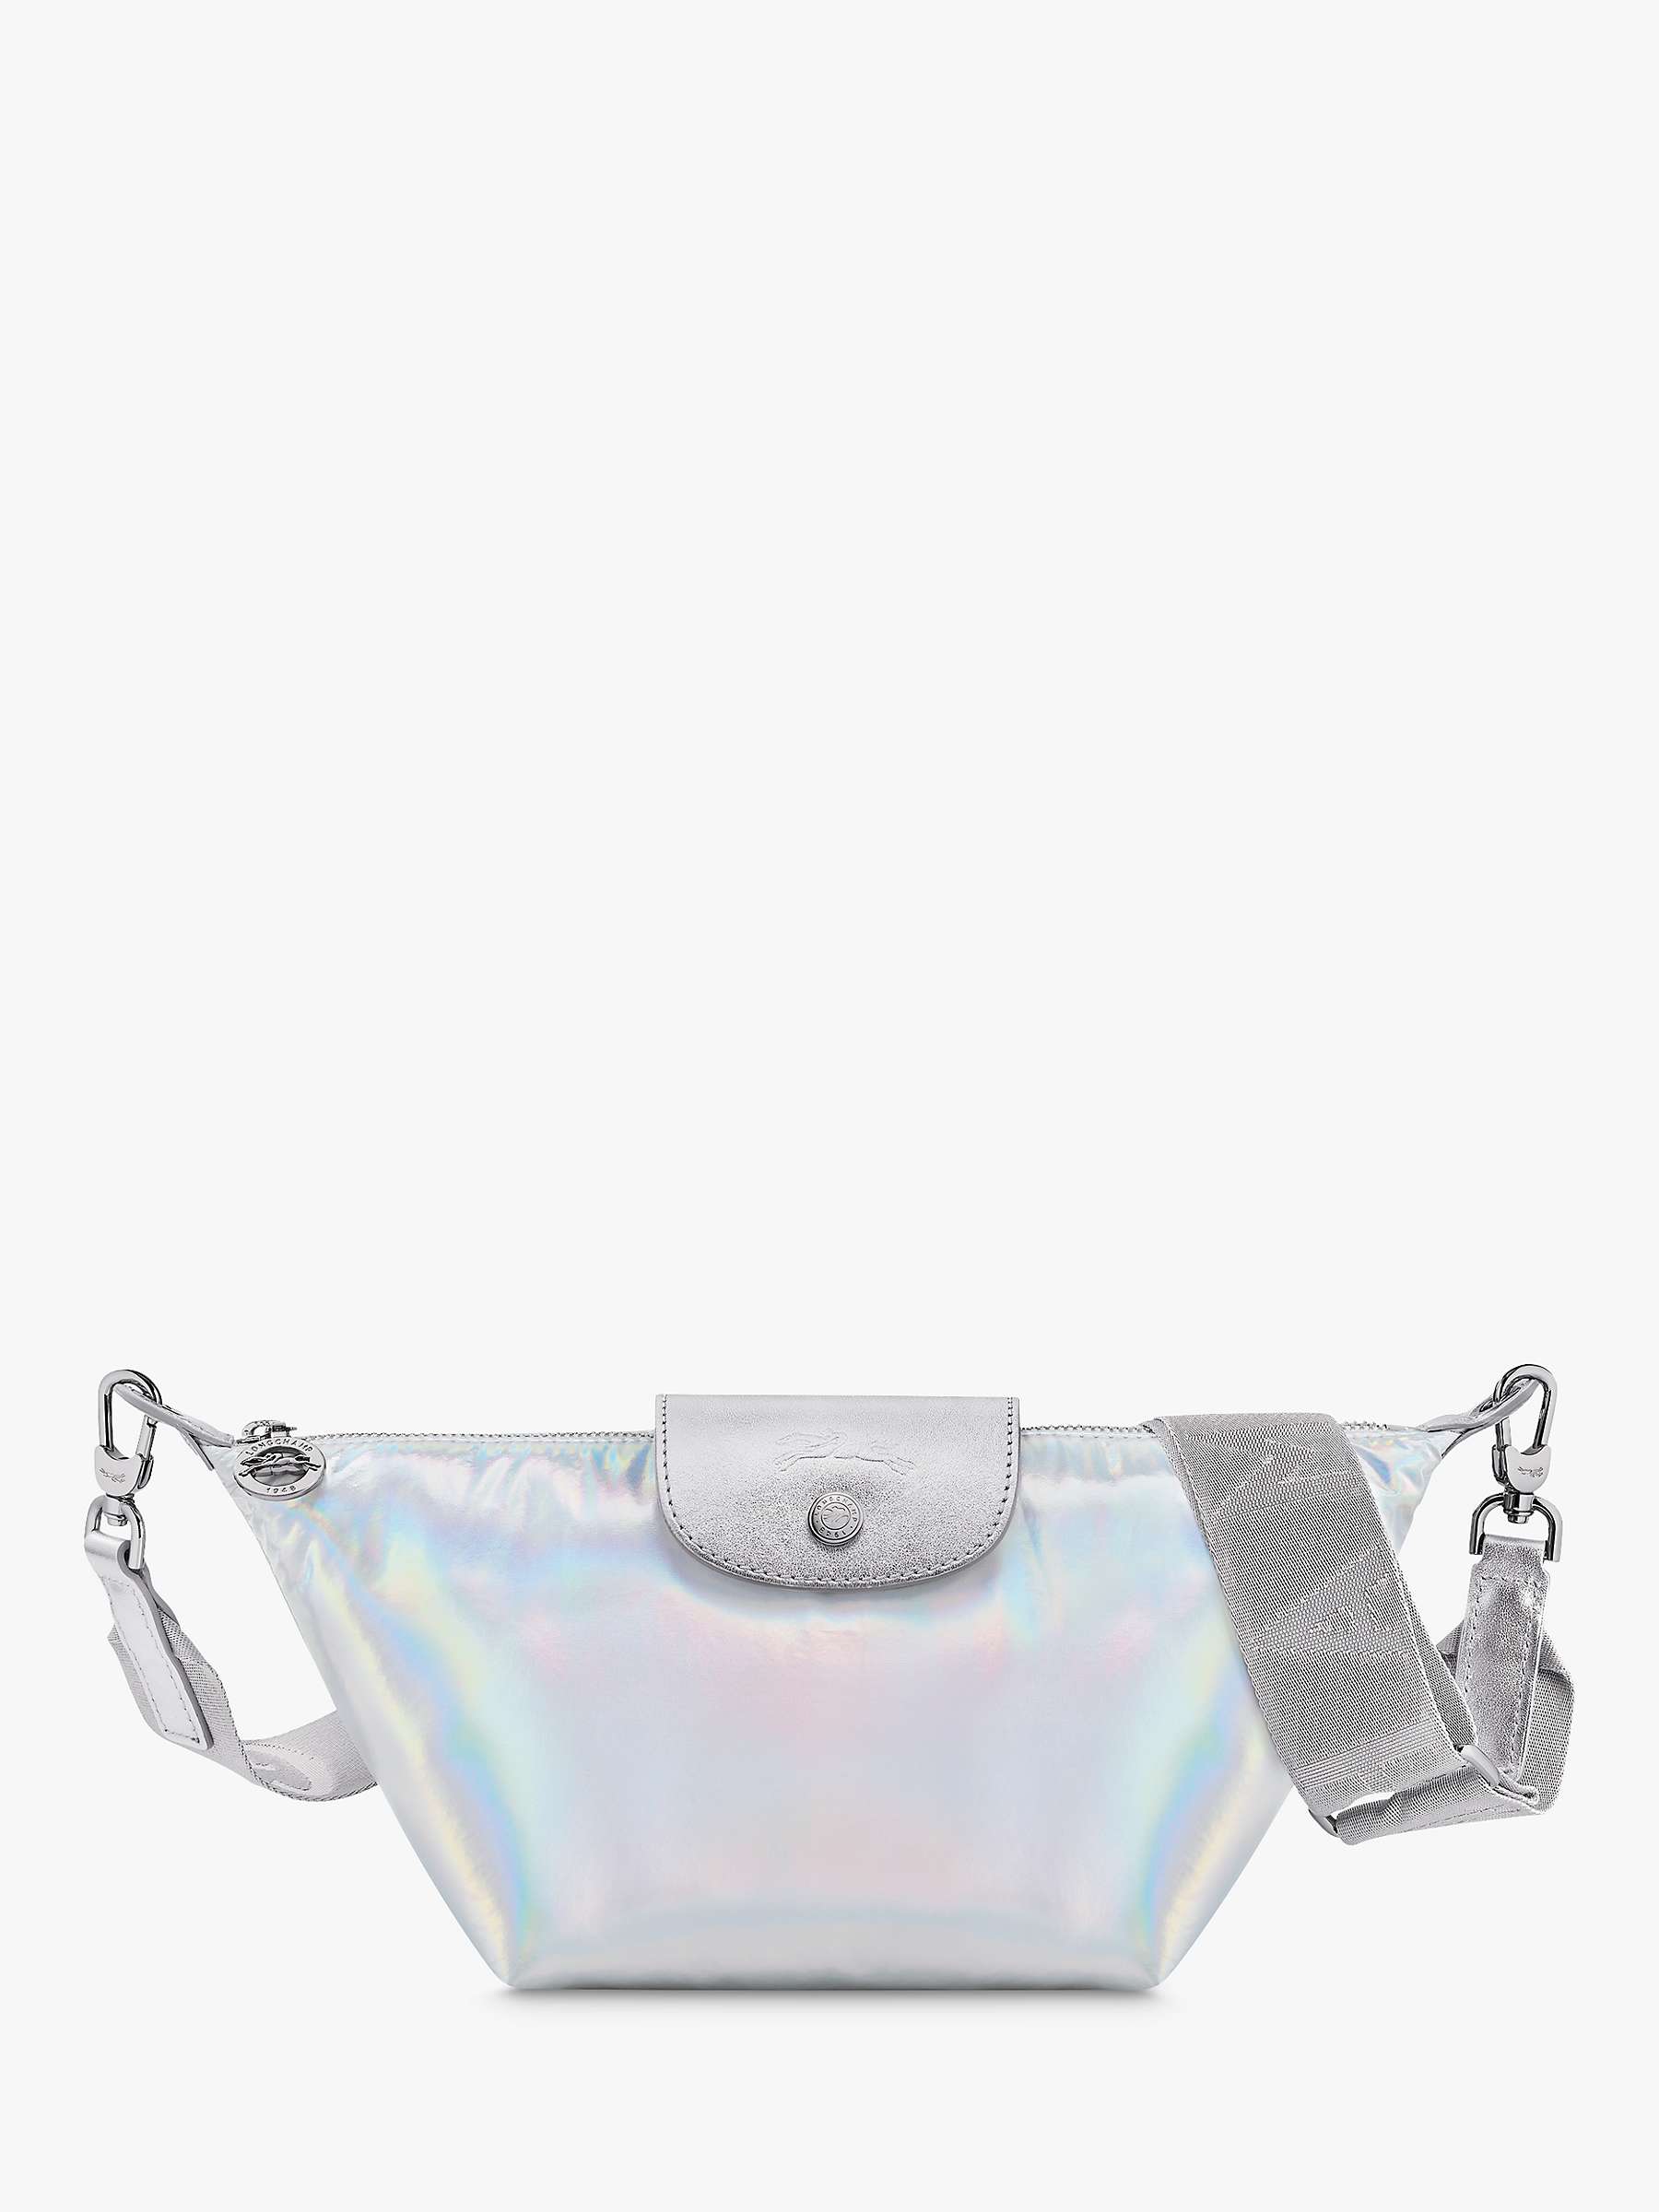 Buy Longchamp Le Pliage Collection Cross Body Bag, Silver Online at johnlewis.com